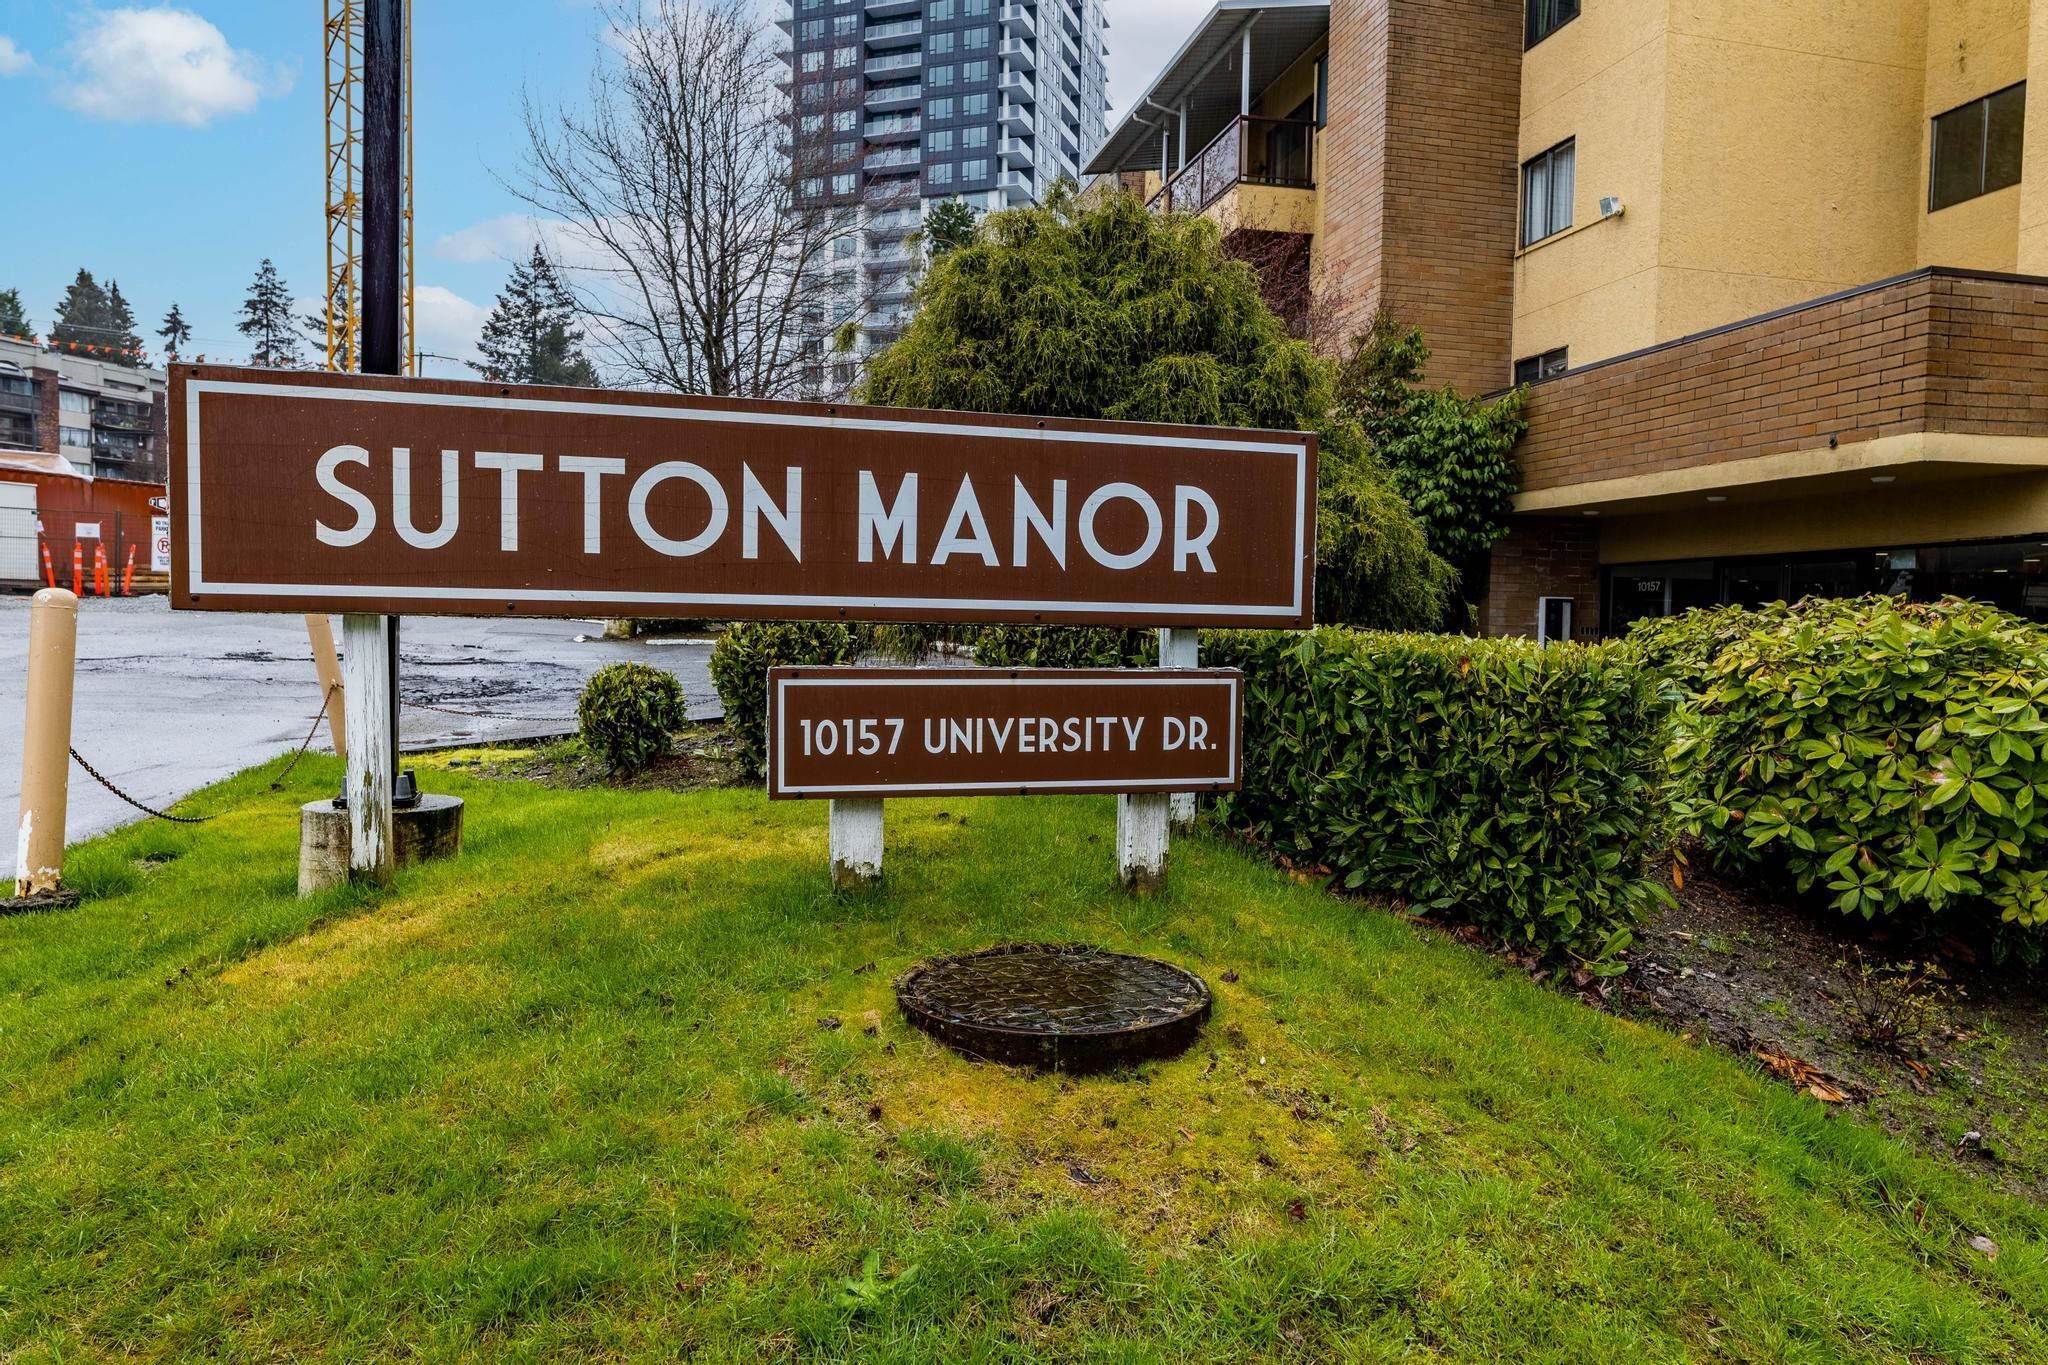 I have sold a property at 215 10157 UNIVERSITY DR in Surrey
